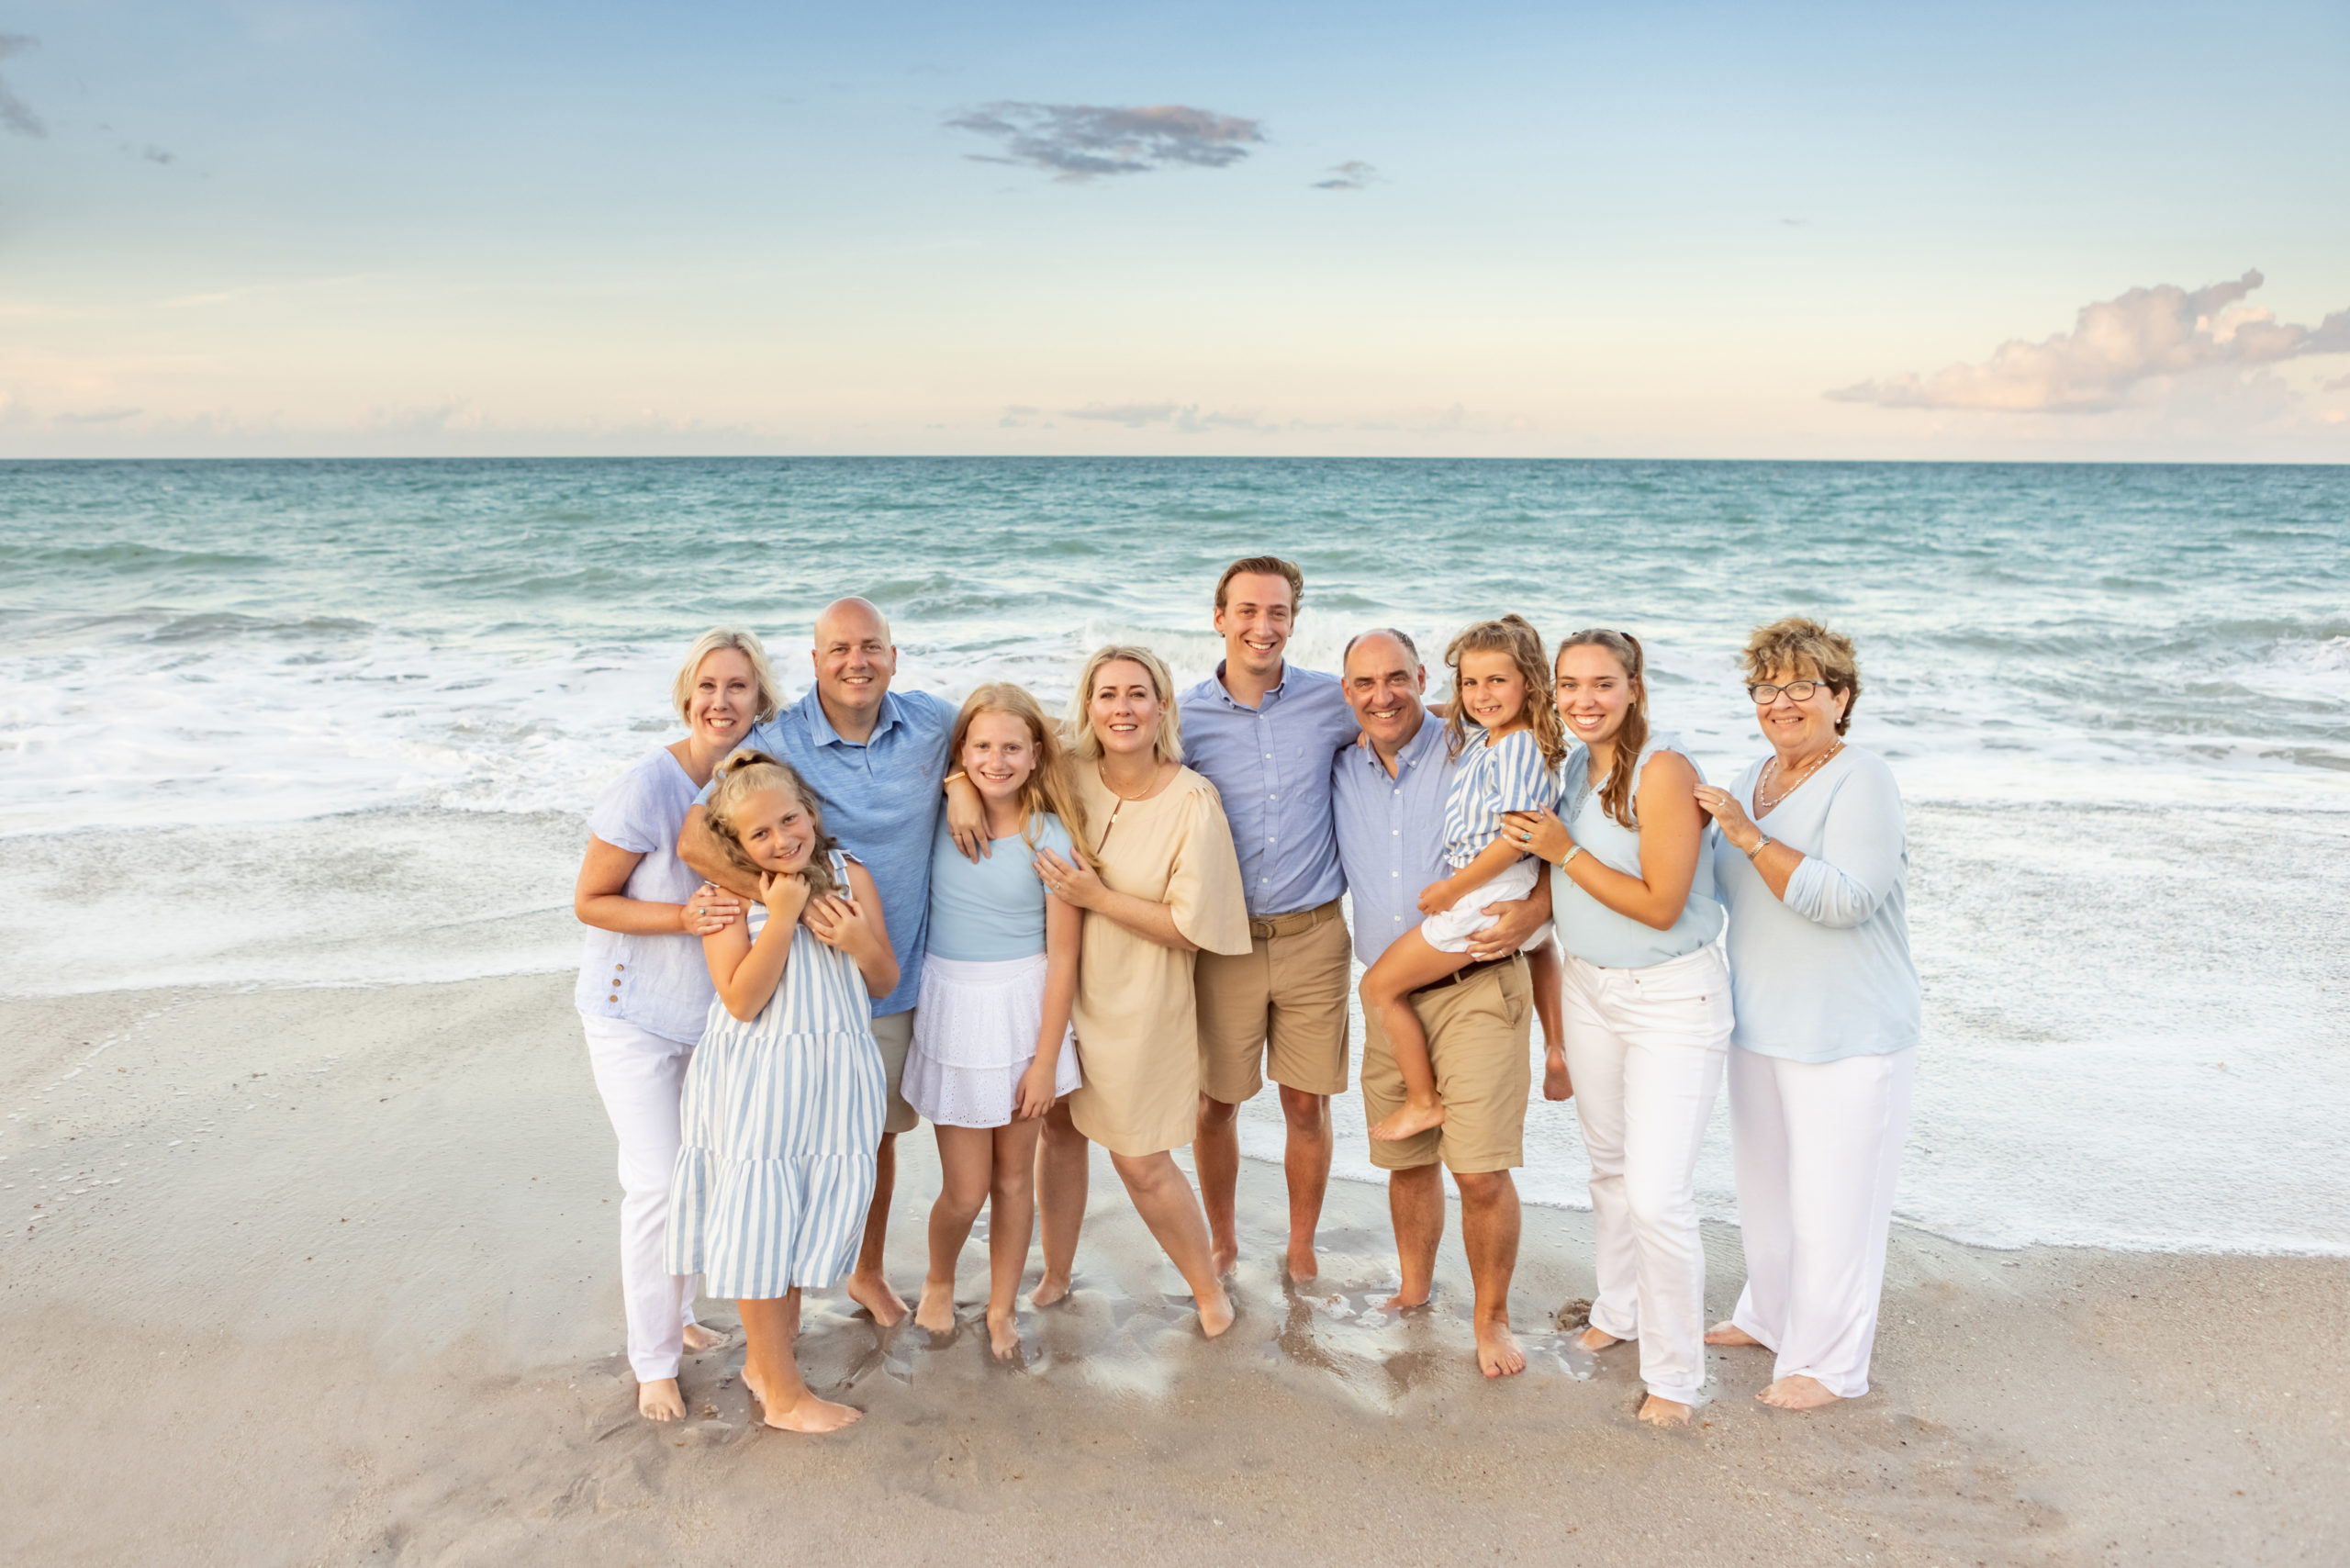 A family portrait with 3 generations at Disney Vero Beach Florida. The sunset was beautiful 